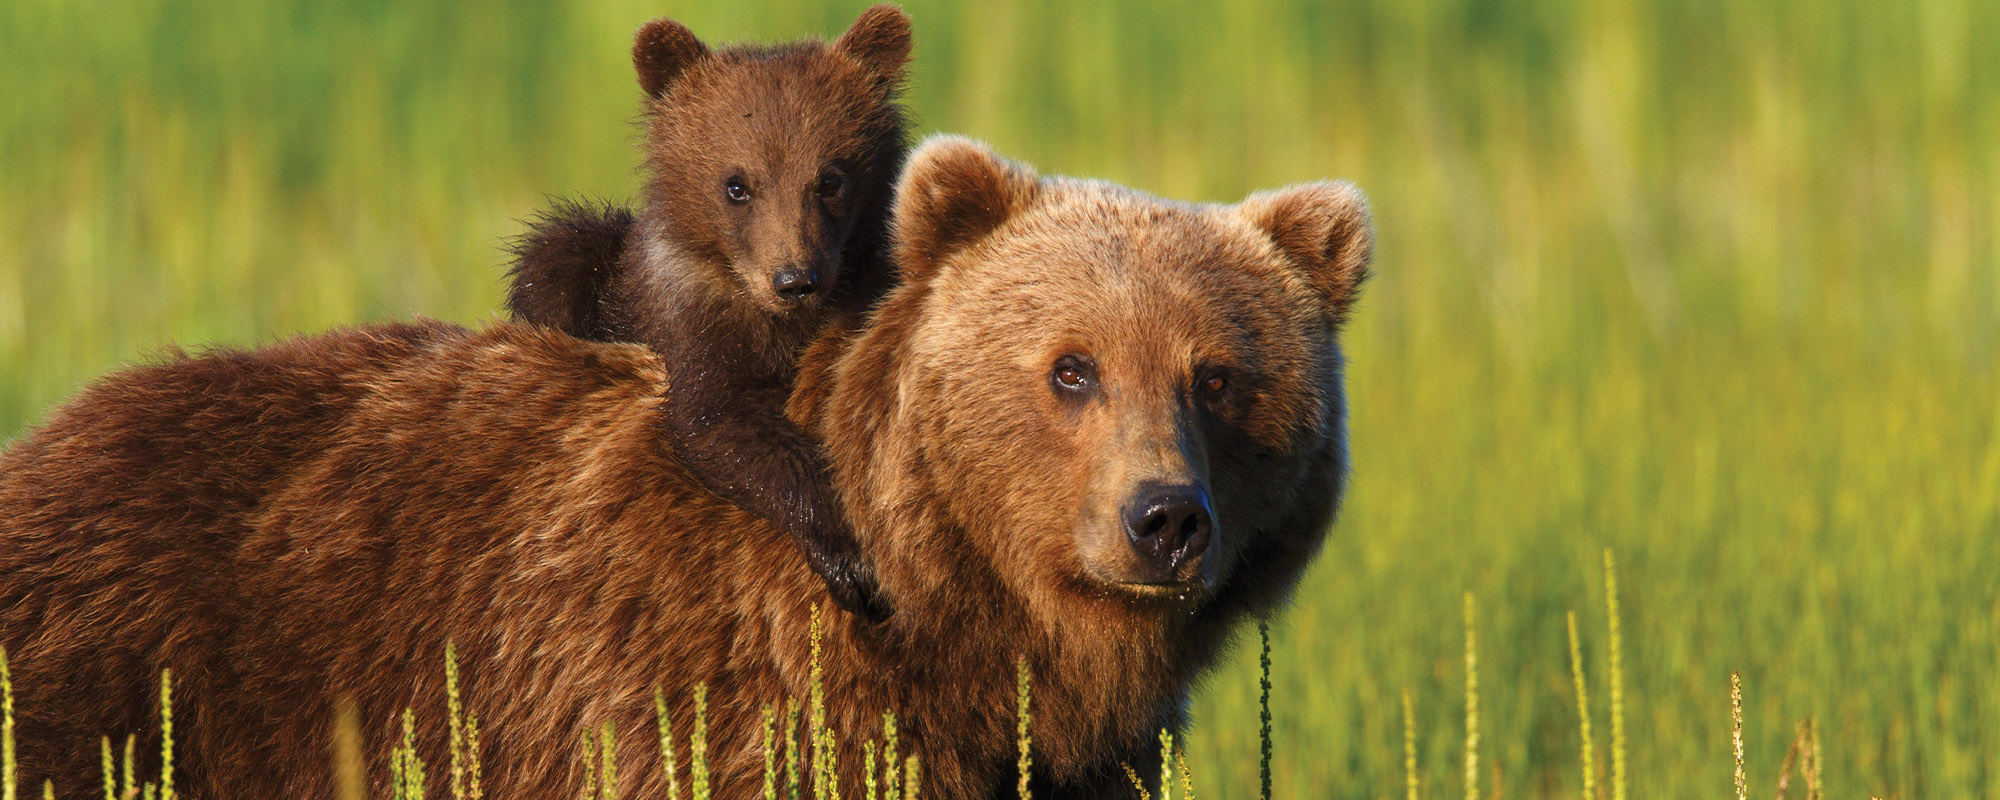 A grizzly bear and their cub